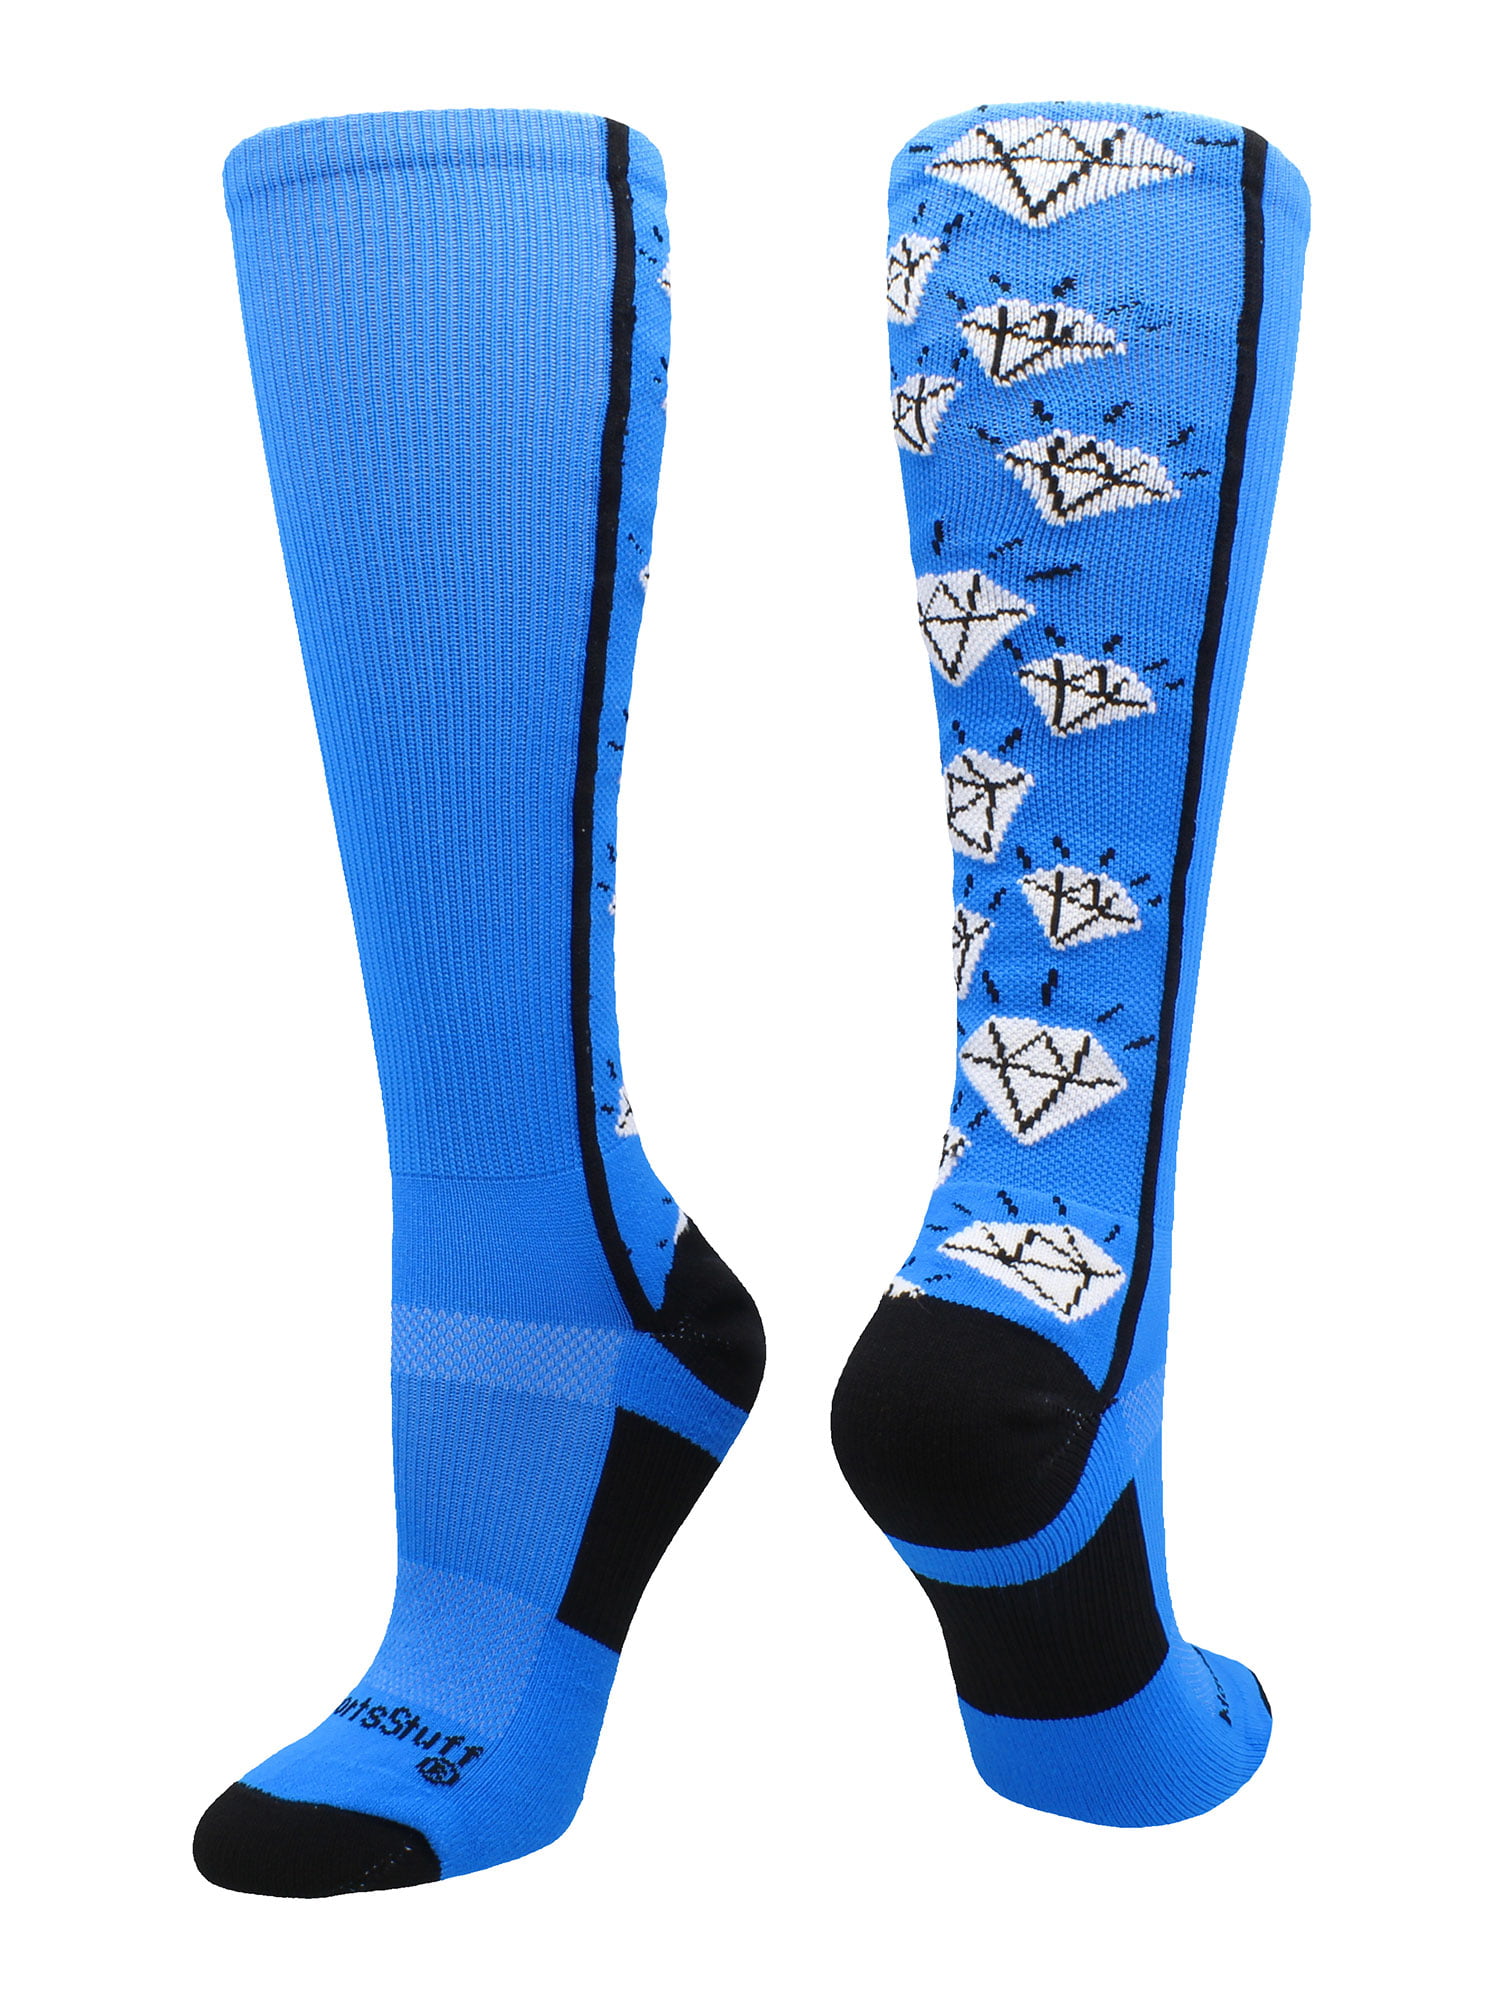 MadSportsStuff - Crazy Socks with Diamonds Over the Calf (Electric Blue ...